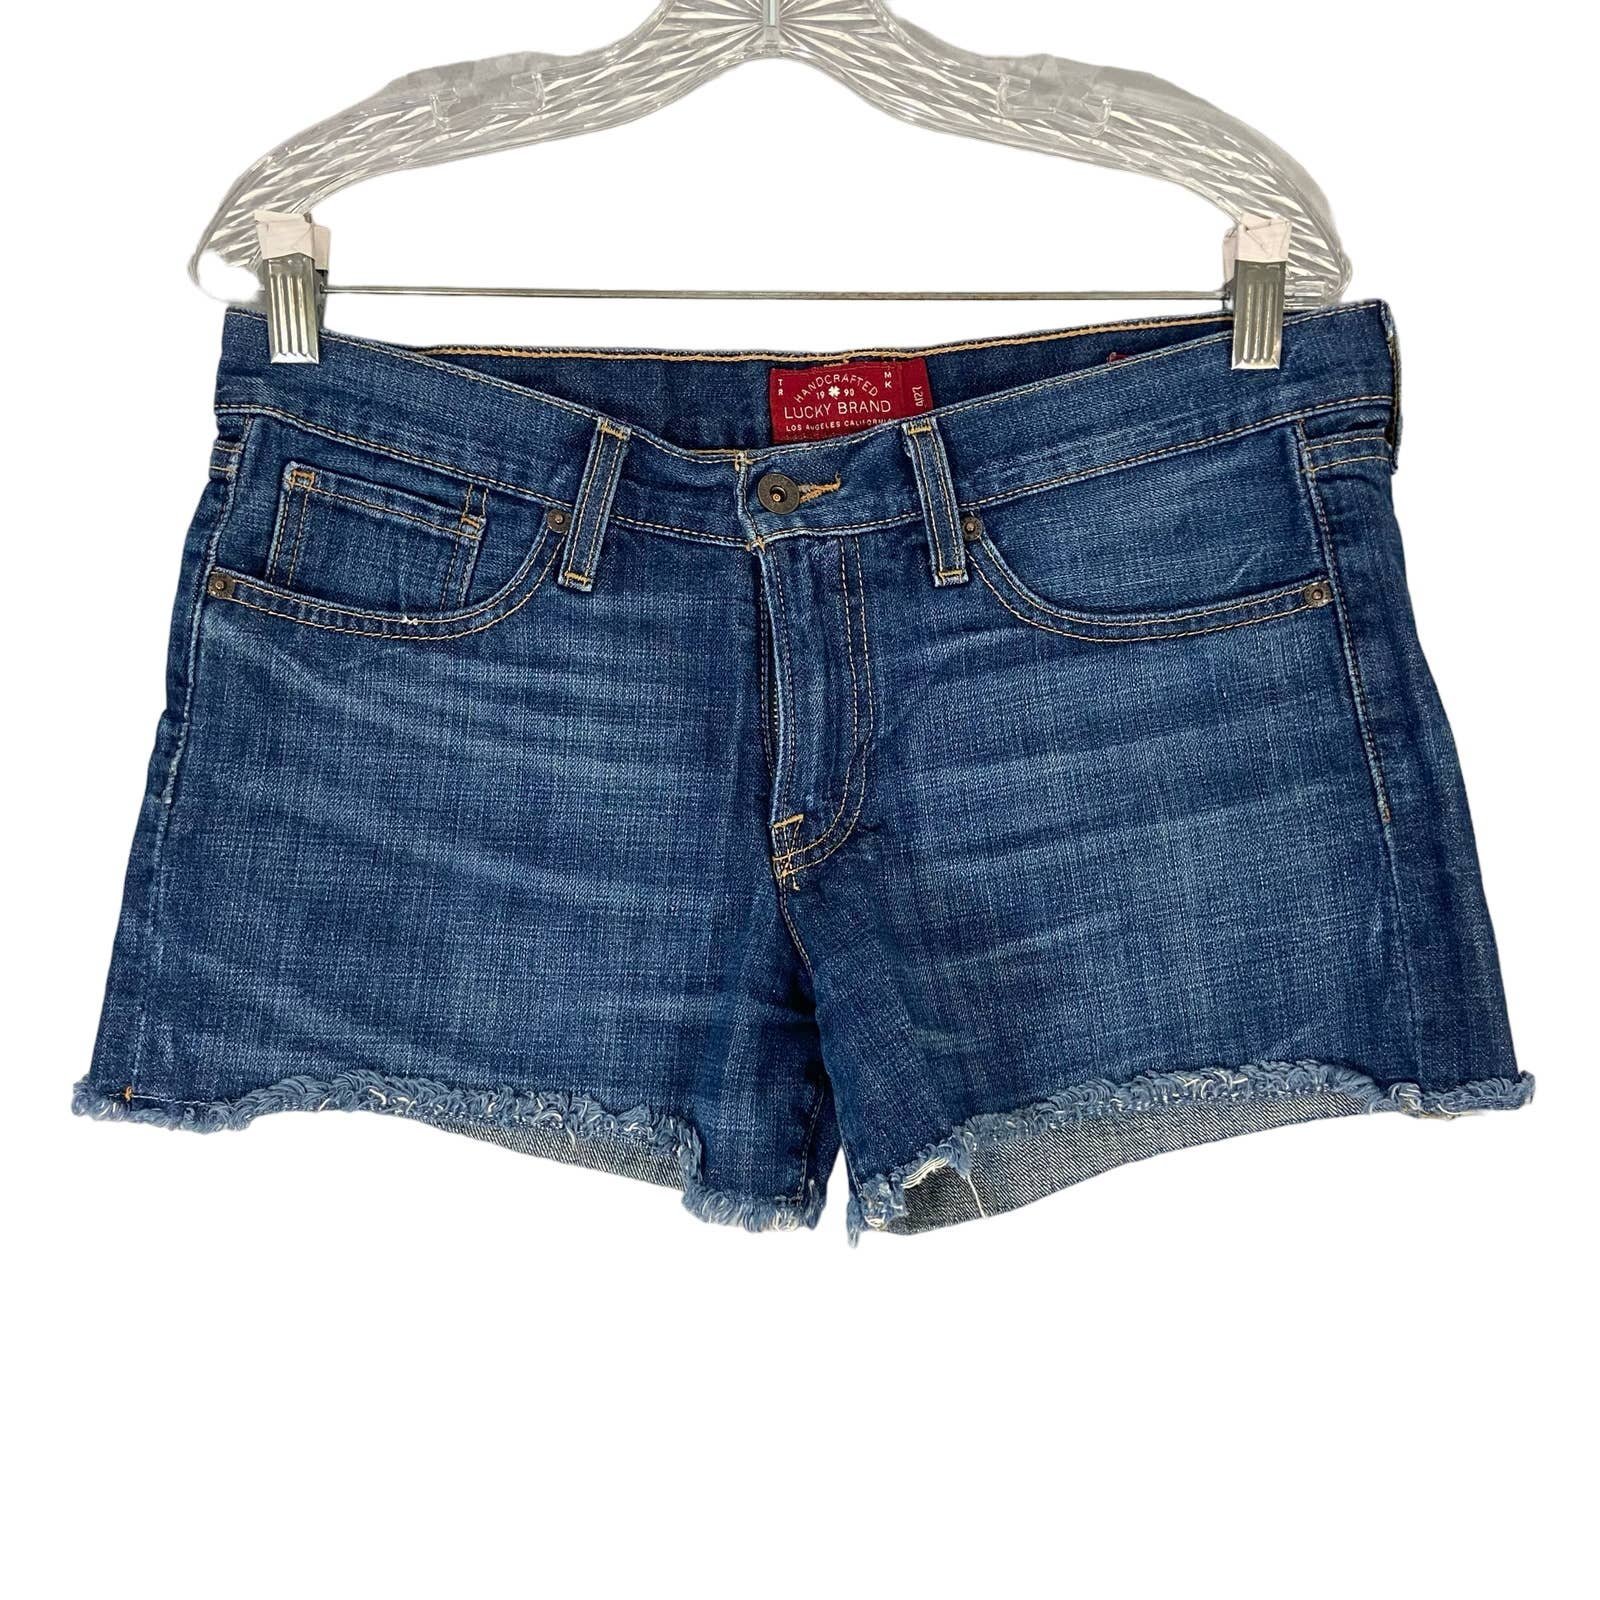 cheapest place to buy  Lucky Brand The Cut Off Jean Short jvUdtWmPF US Sale